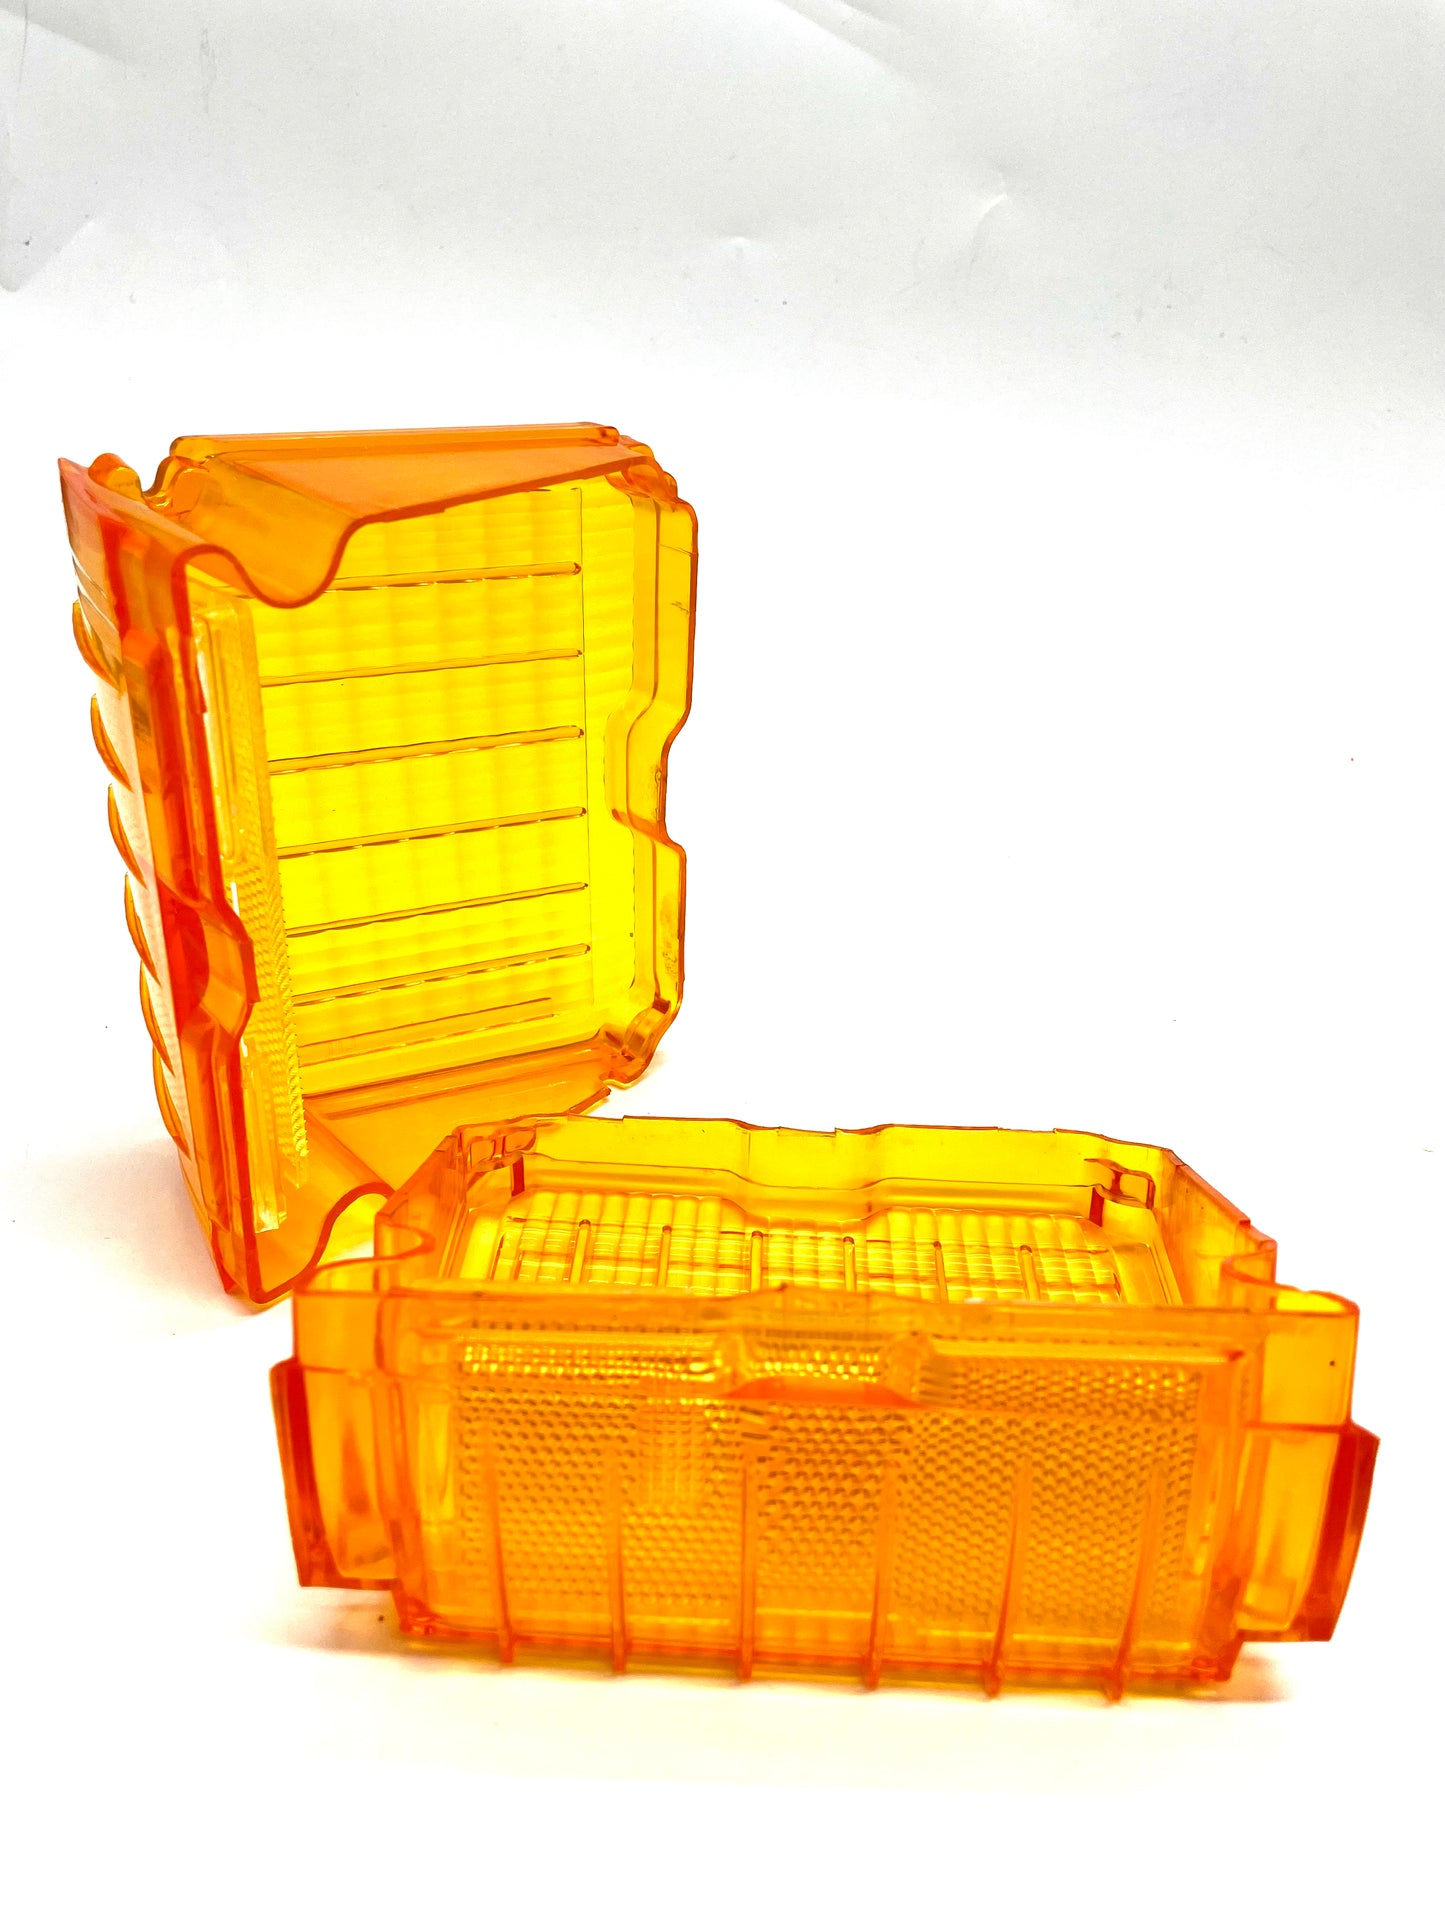 1973 Chevelle Parking Light Lens, Amber color, Sold in pairs